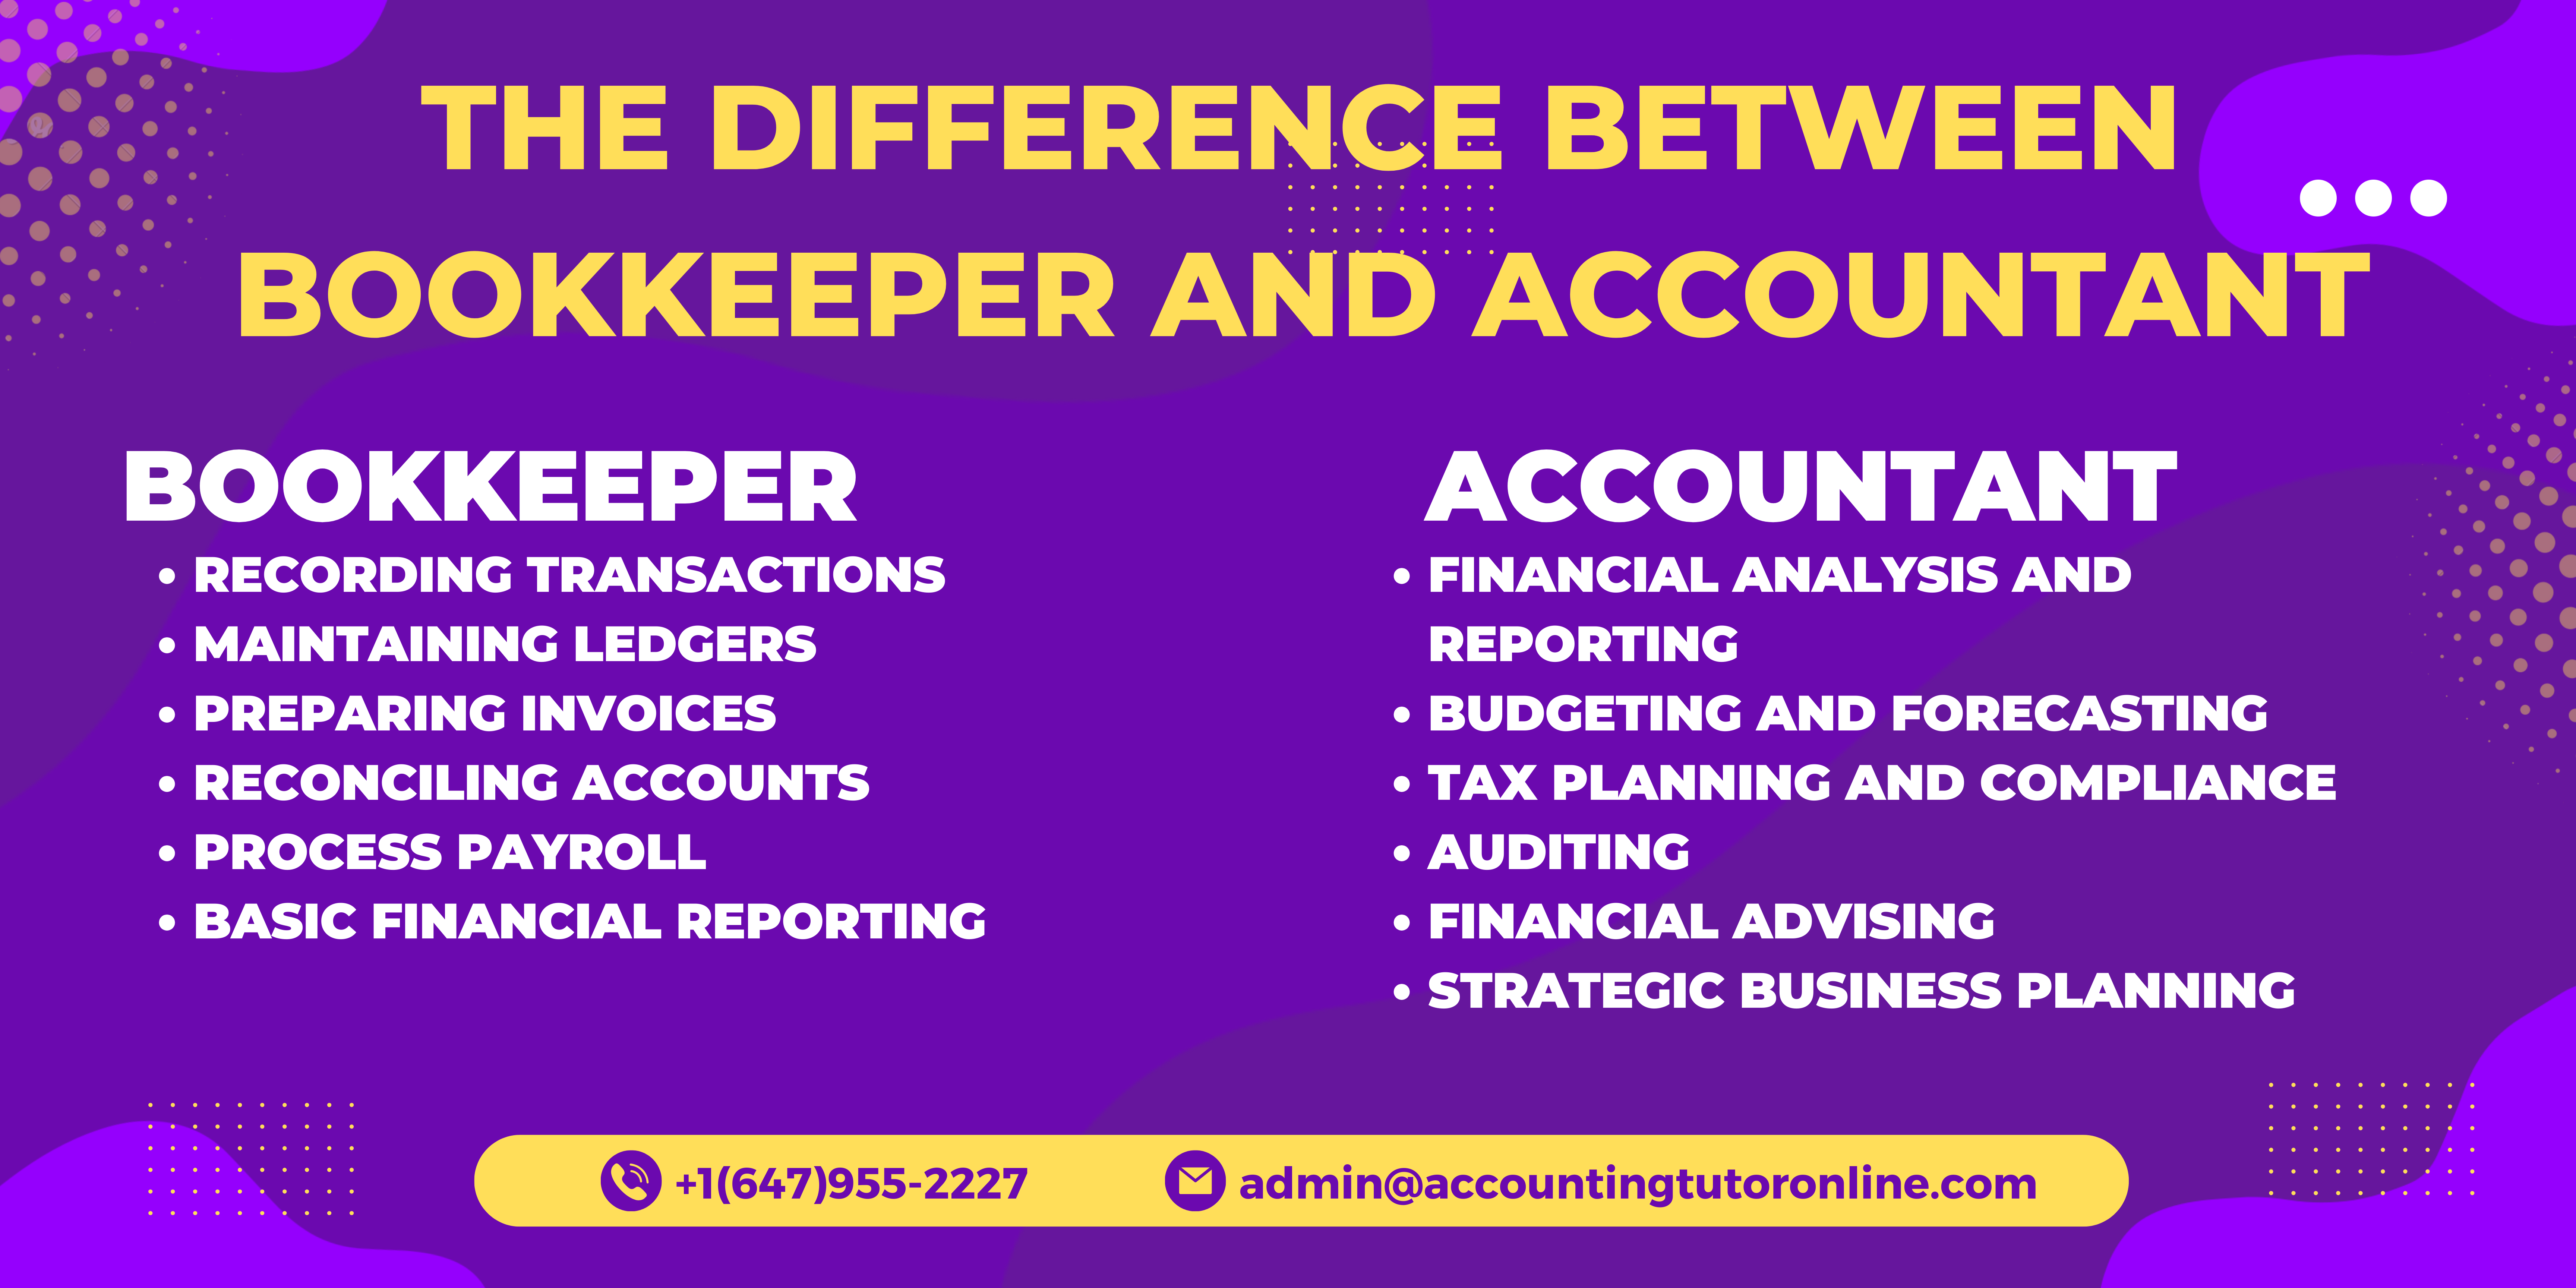 The Difference Between Bookkeeper and Accountant